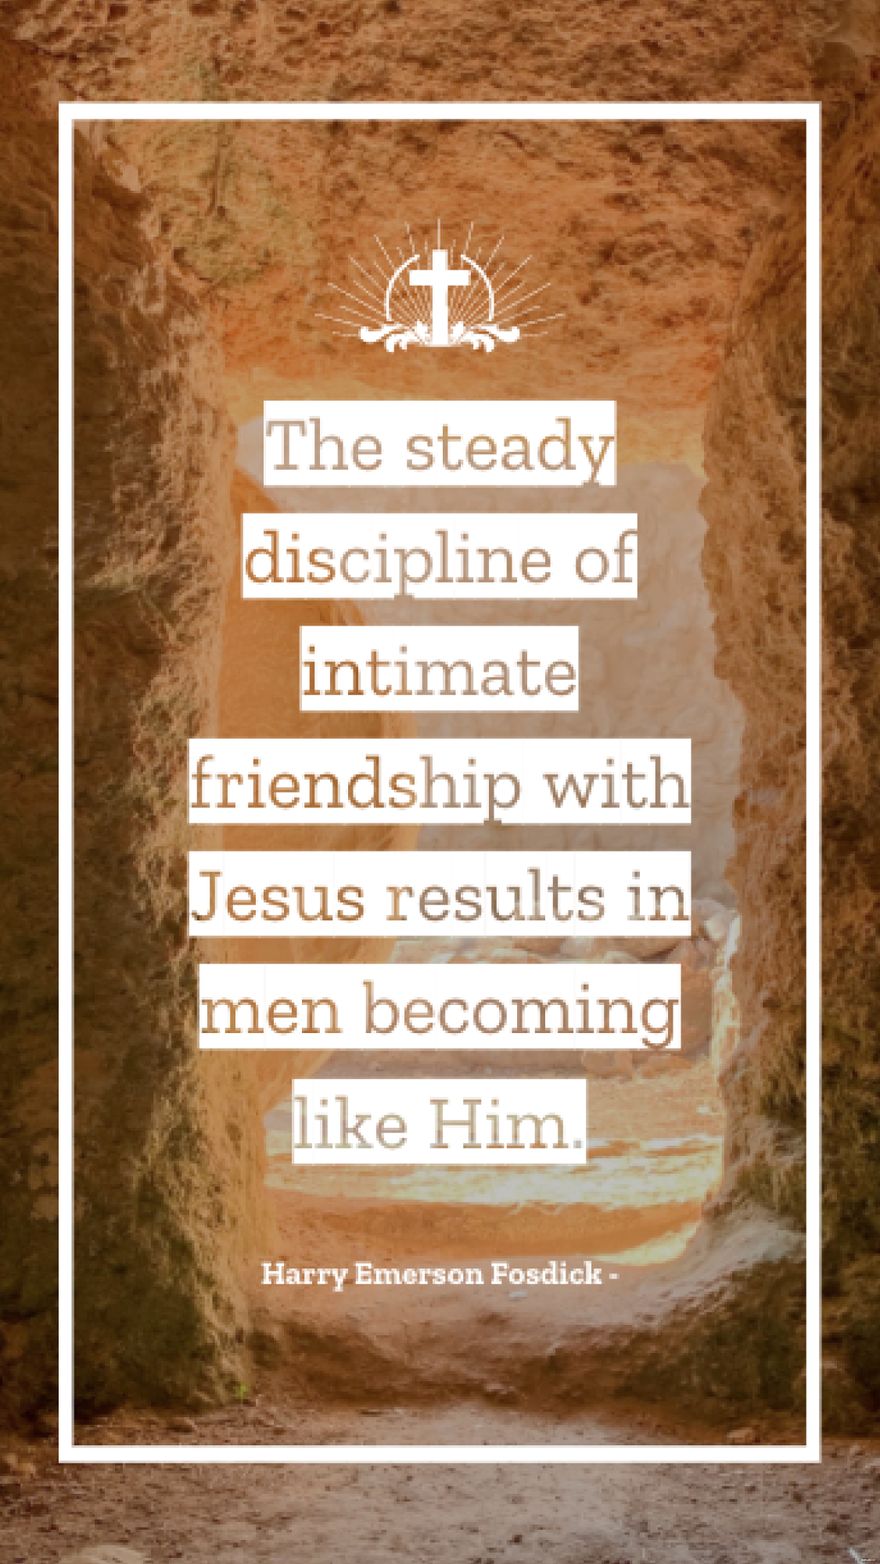 Harry Emerson Fosdick - The steady discipline of intimate friendship with Jesus results in men becoming like Him. in JPG